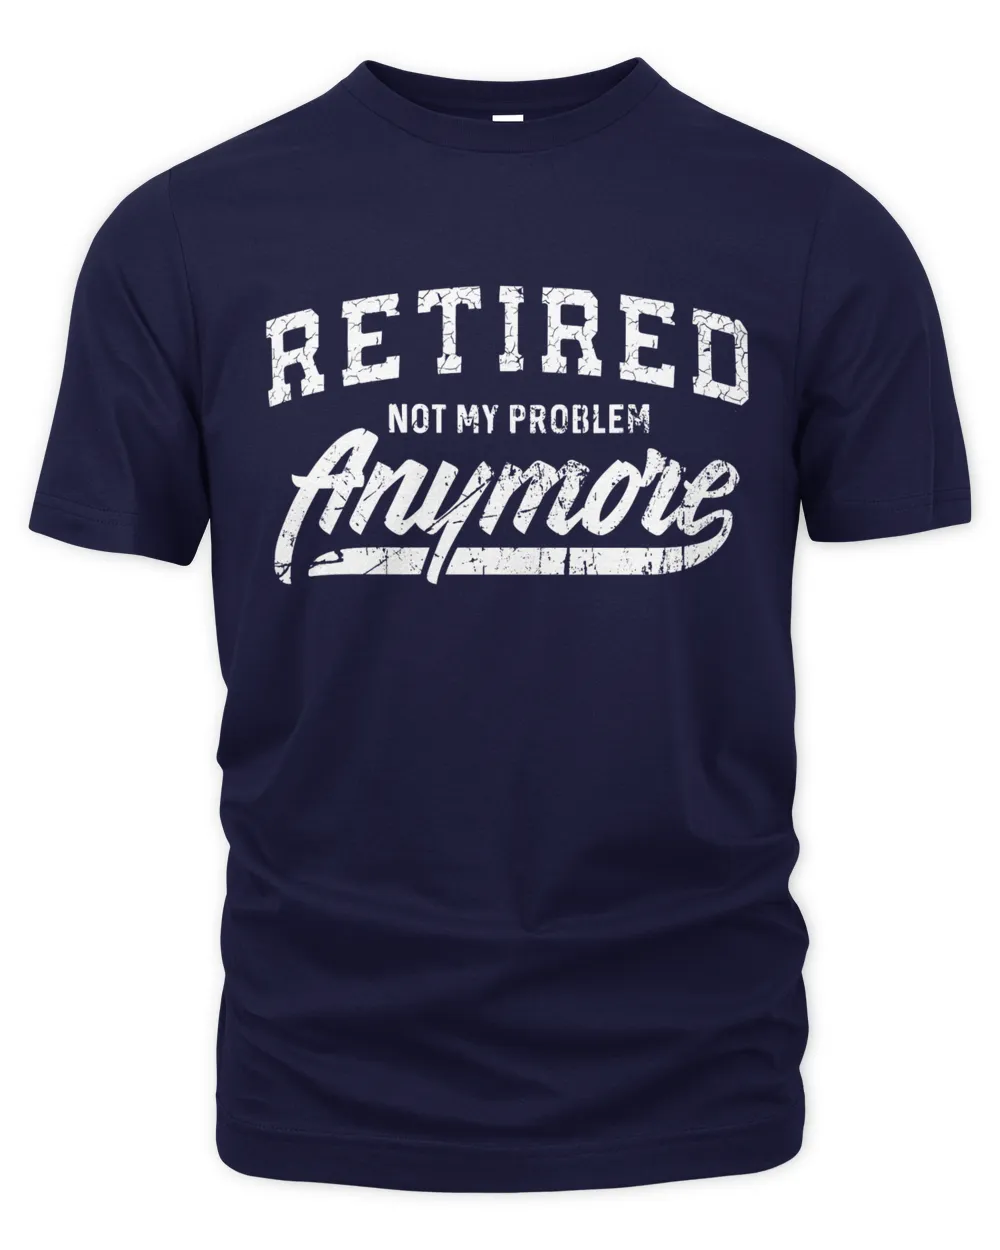 I'm Retired Shirt, Not My Problem Anymore, Funny Grandpa Shirt, Happy Retirement Tee, Retirement Gifts For Men